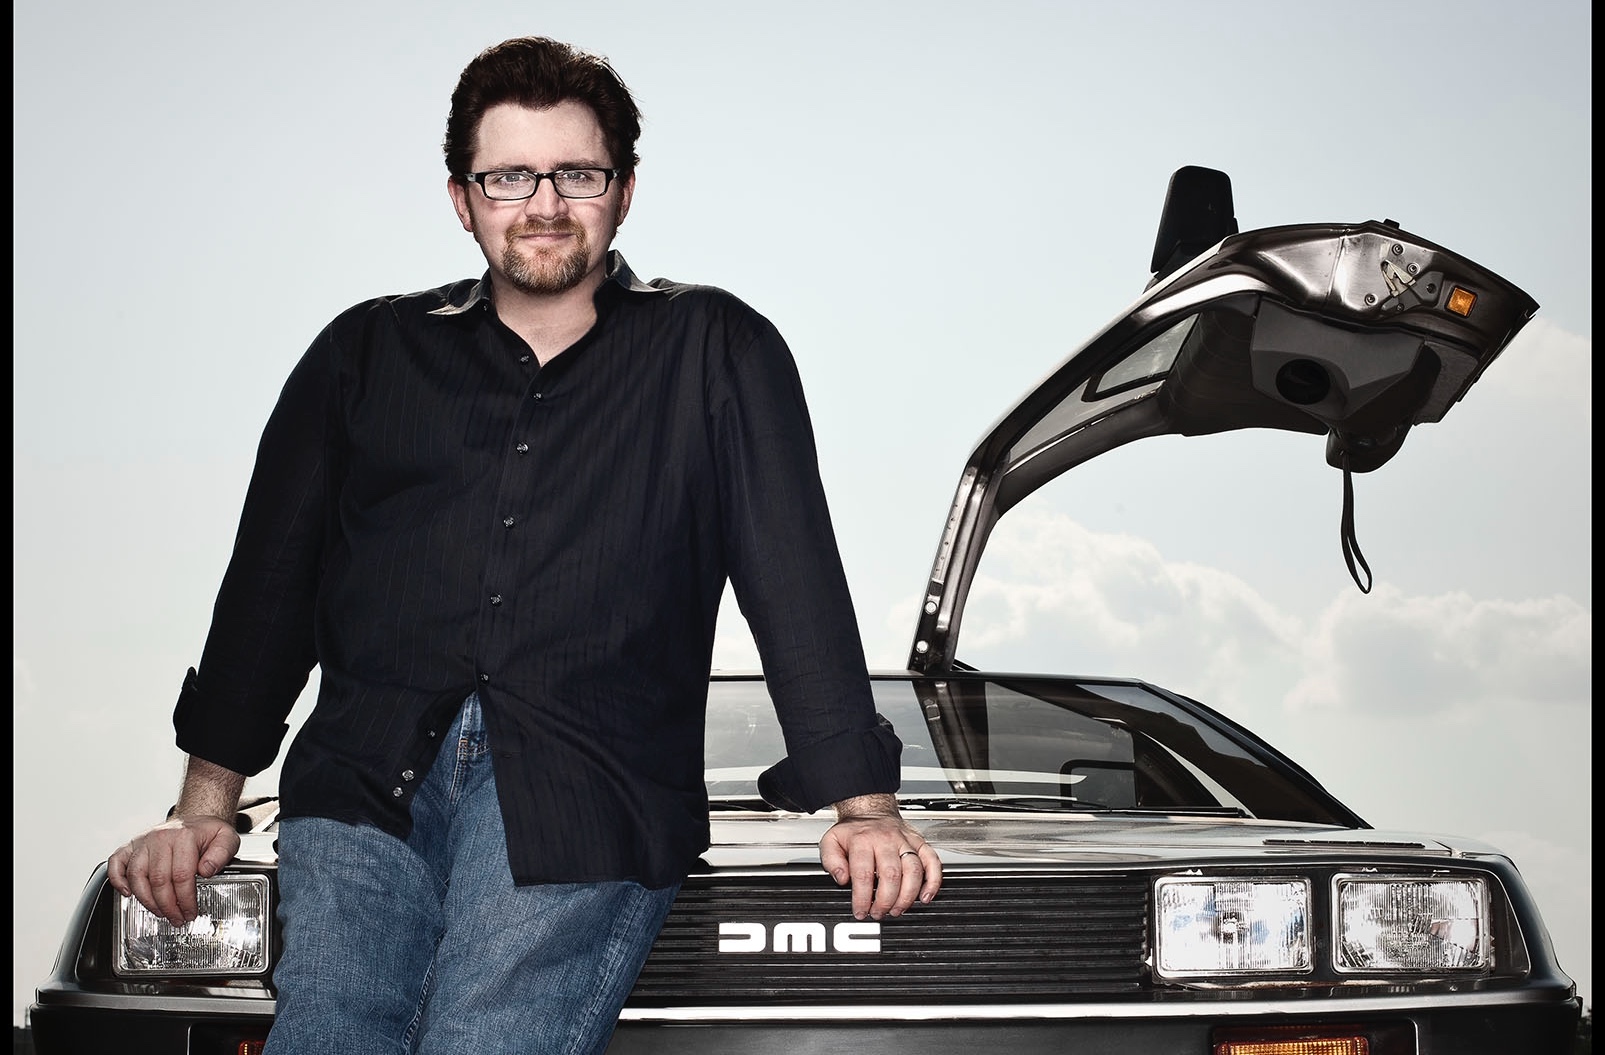 Ernest Cline's author photo is as nerdy as they come. (Photo: Dan Winters/Ballantine Books)